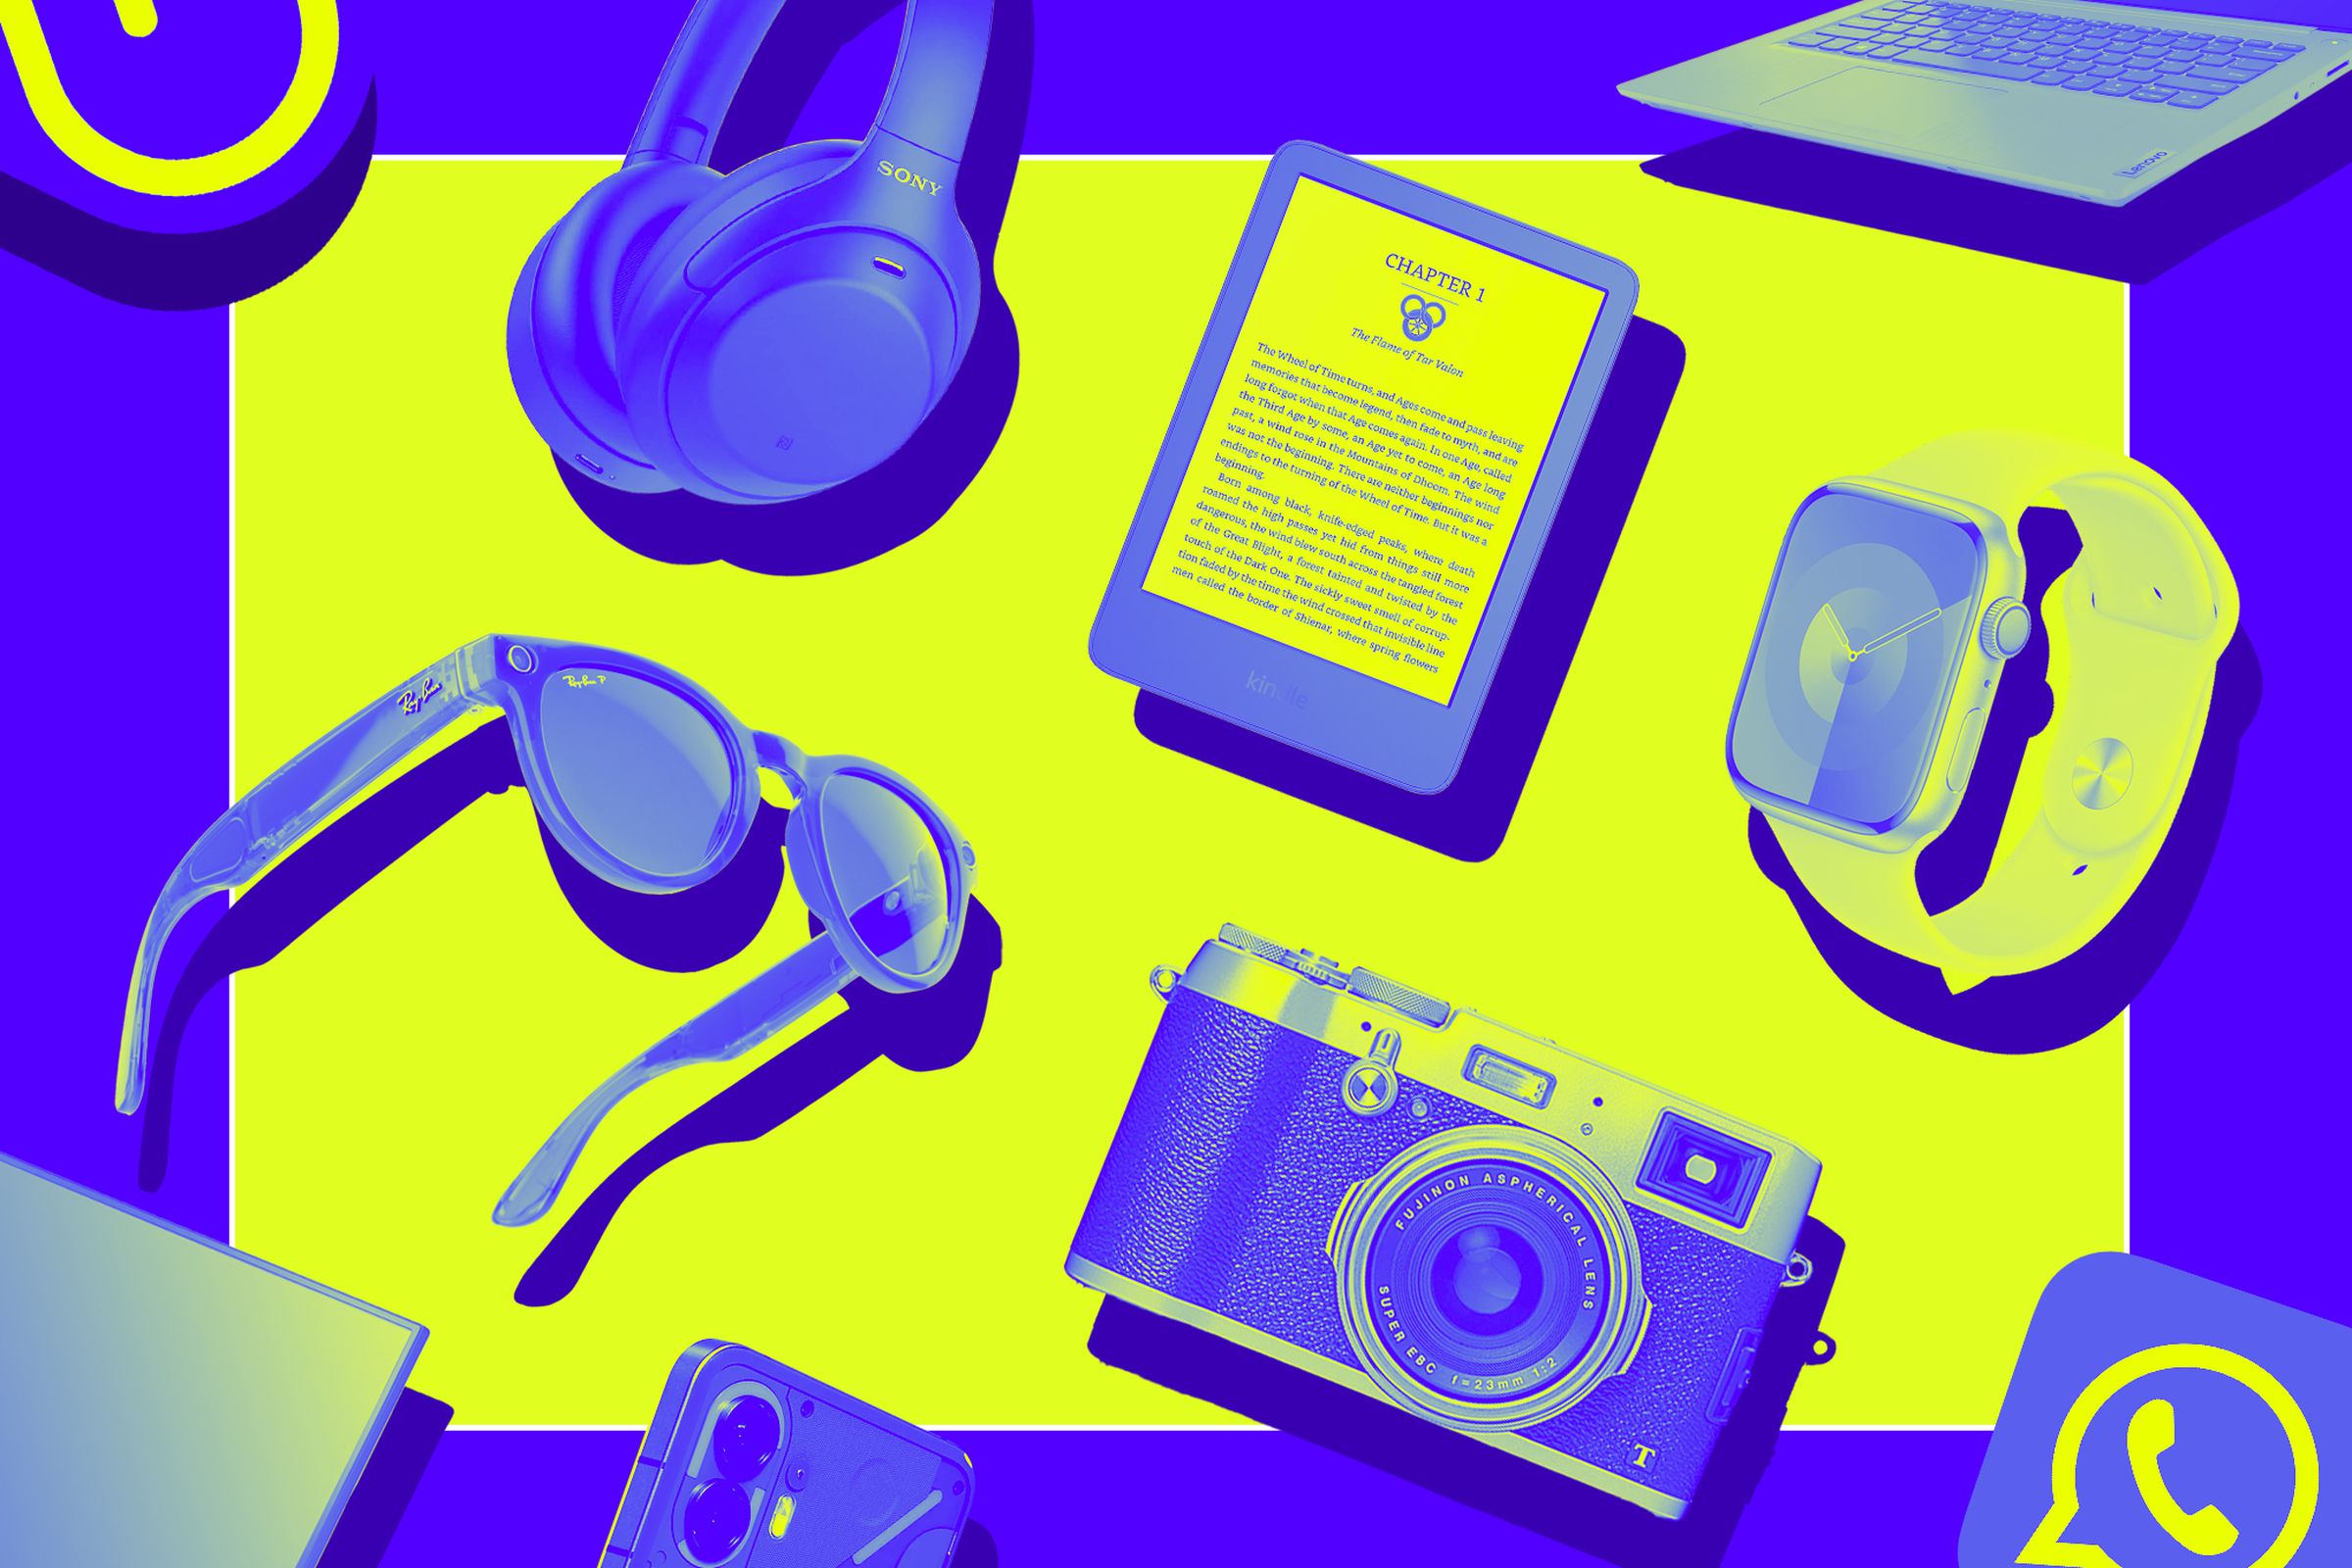 An illustration of several gadgets in a Vergecast style.